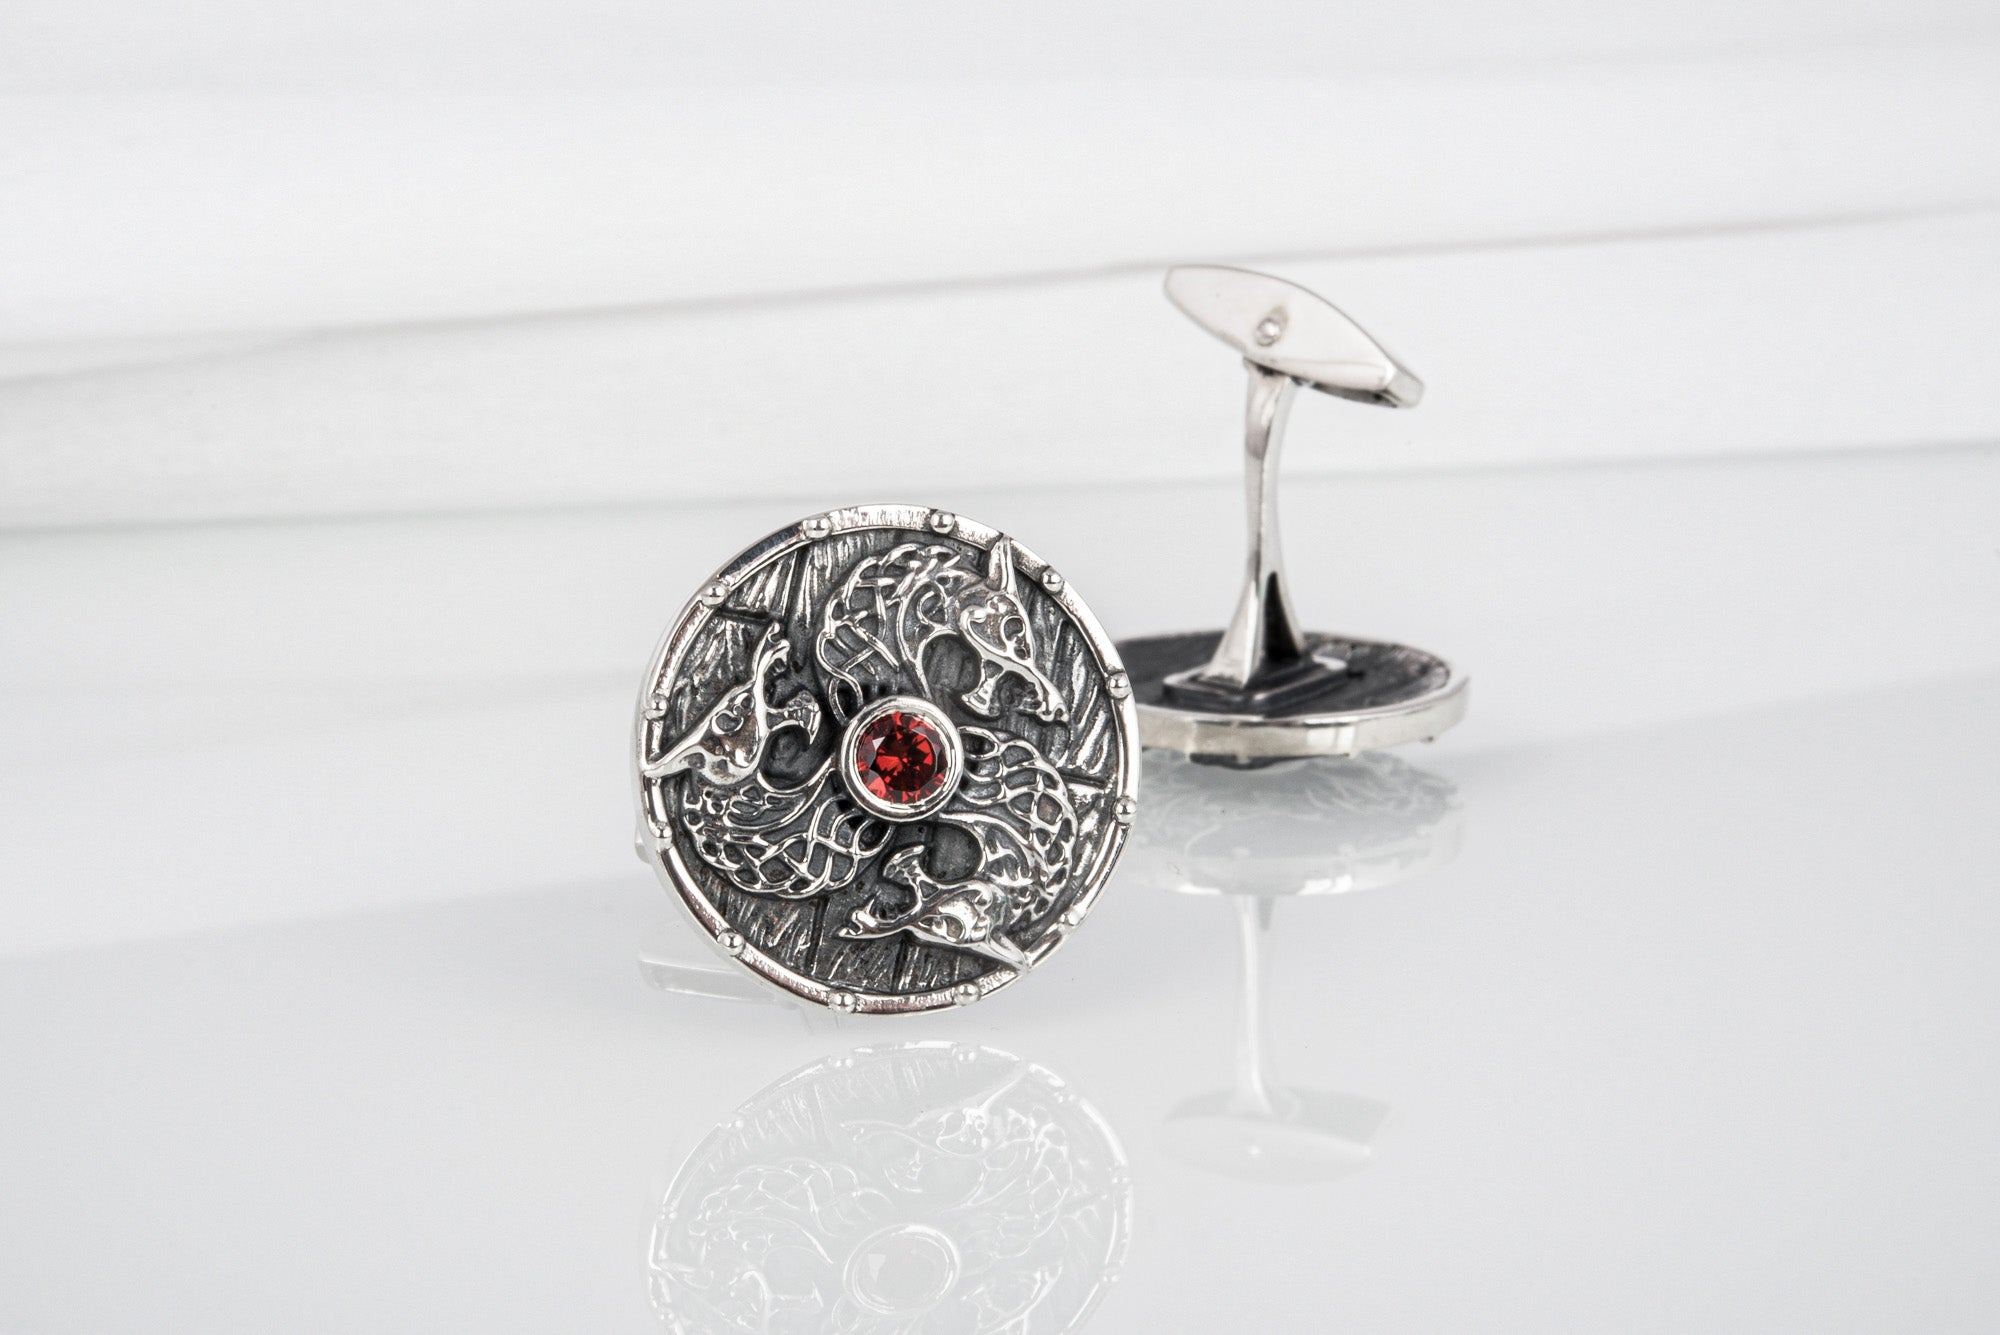 Viking cufflinks shield with Fenrir and gem, unique handcrafted sterling silver jewelry